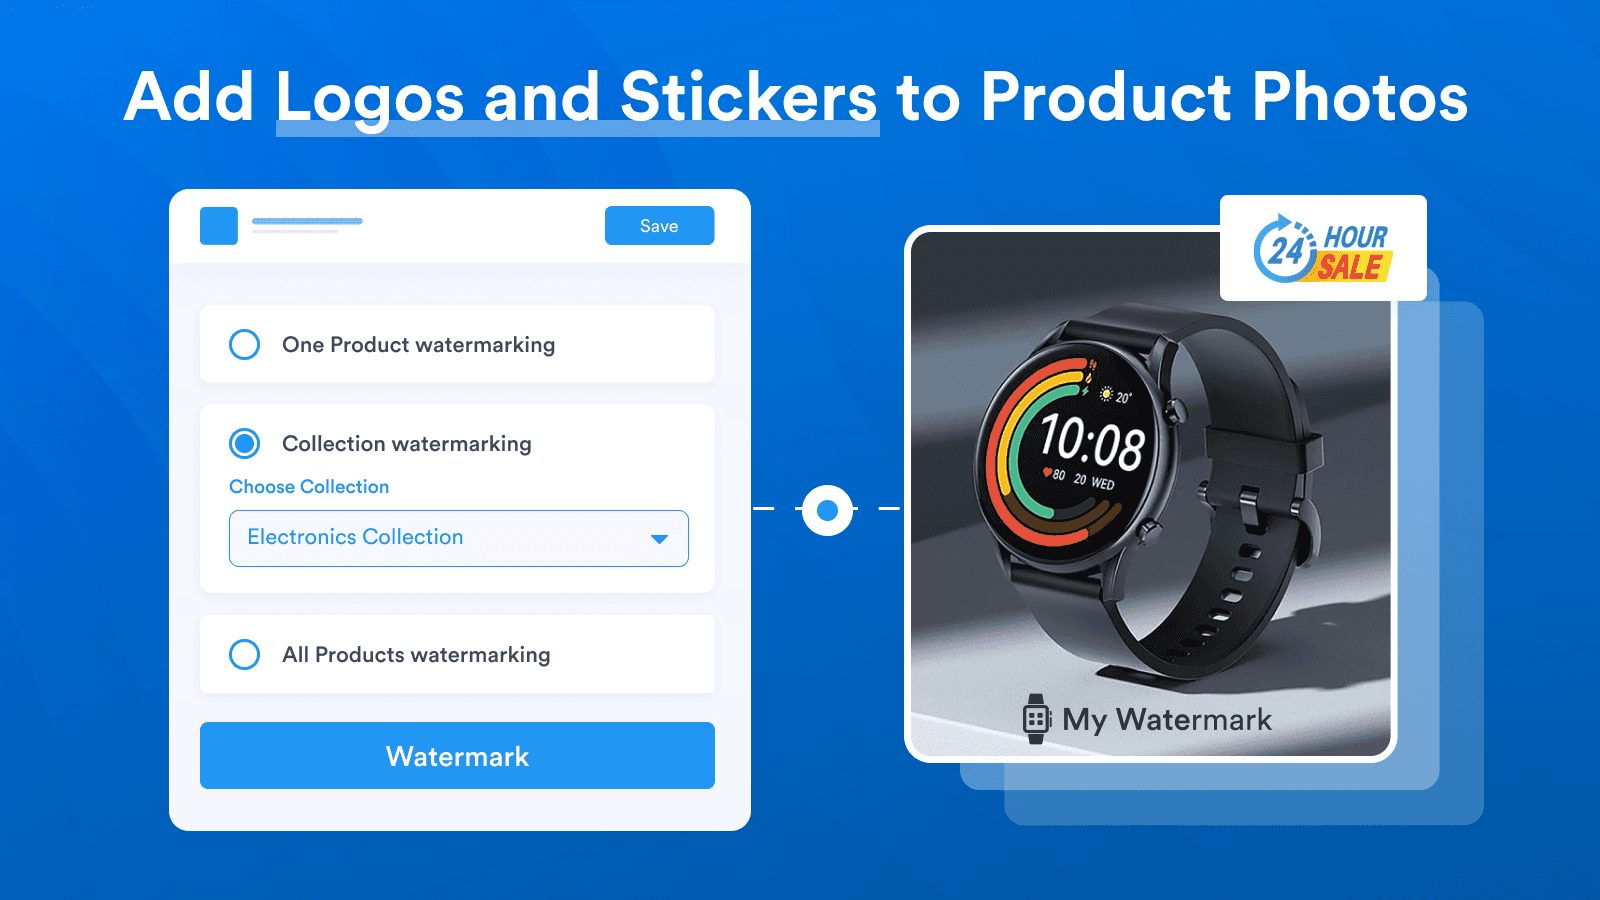 Add logo and stickers to your product photos